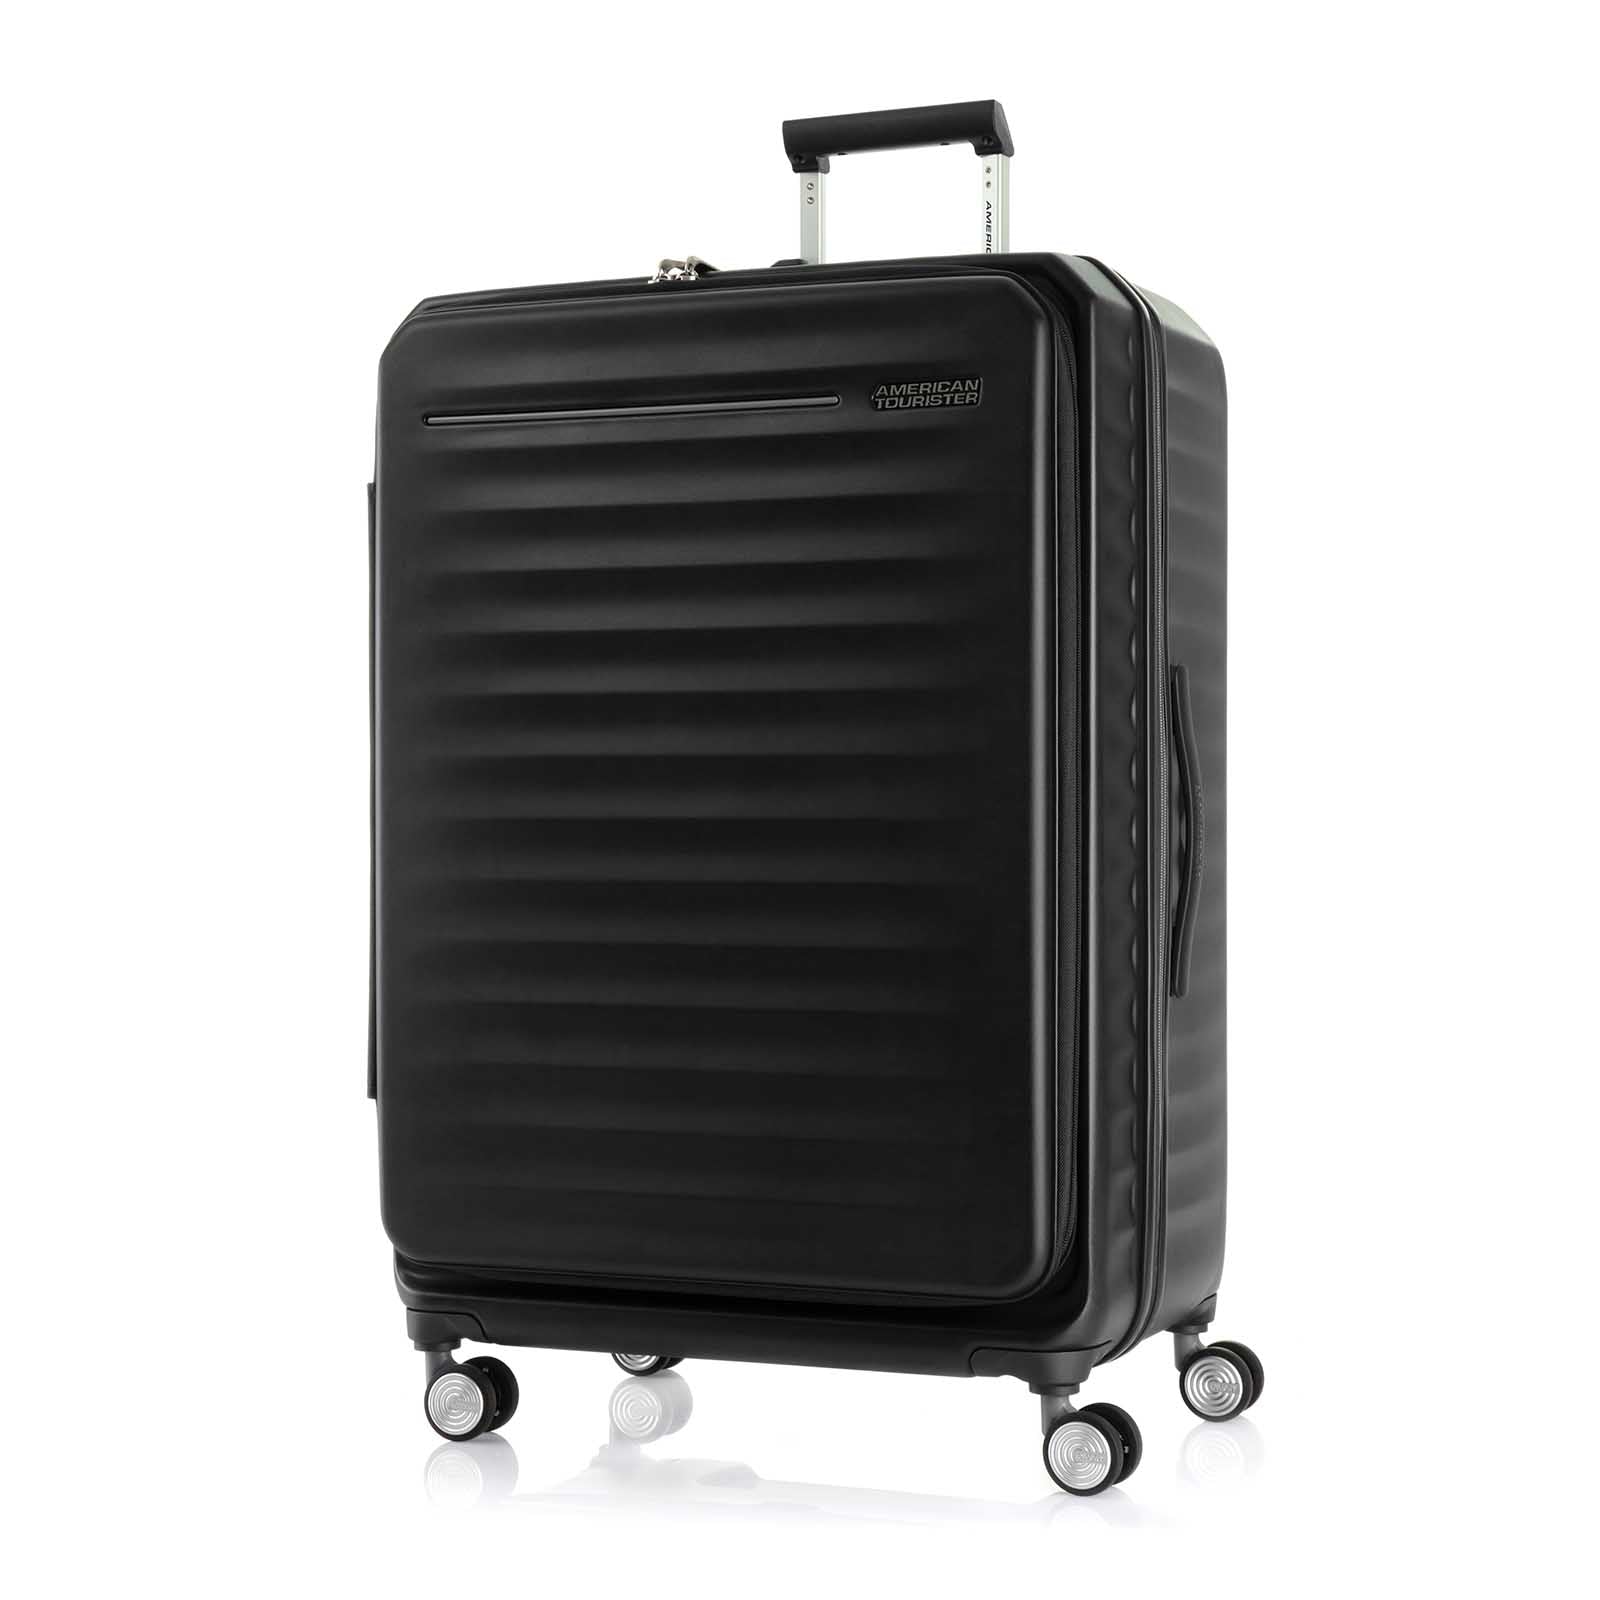 American-Tourister-Frontec-79cm-Suitcase-Jet-Black-Front-Angle